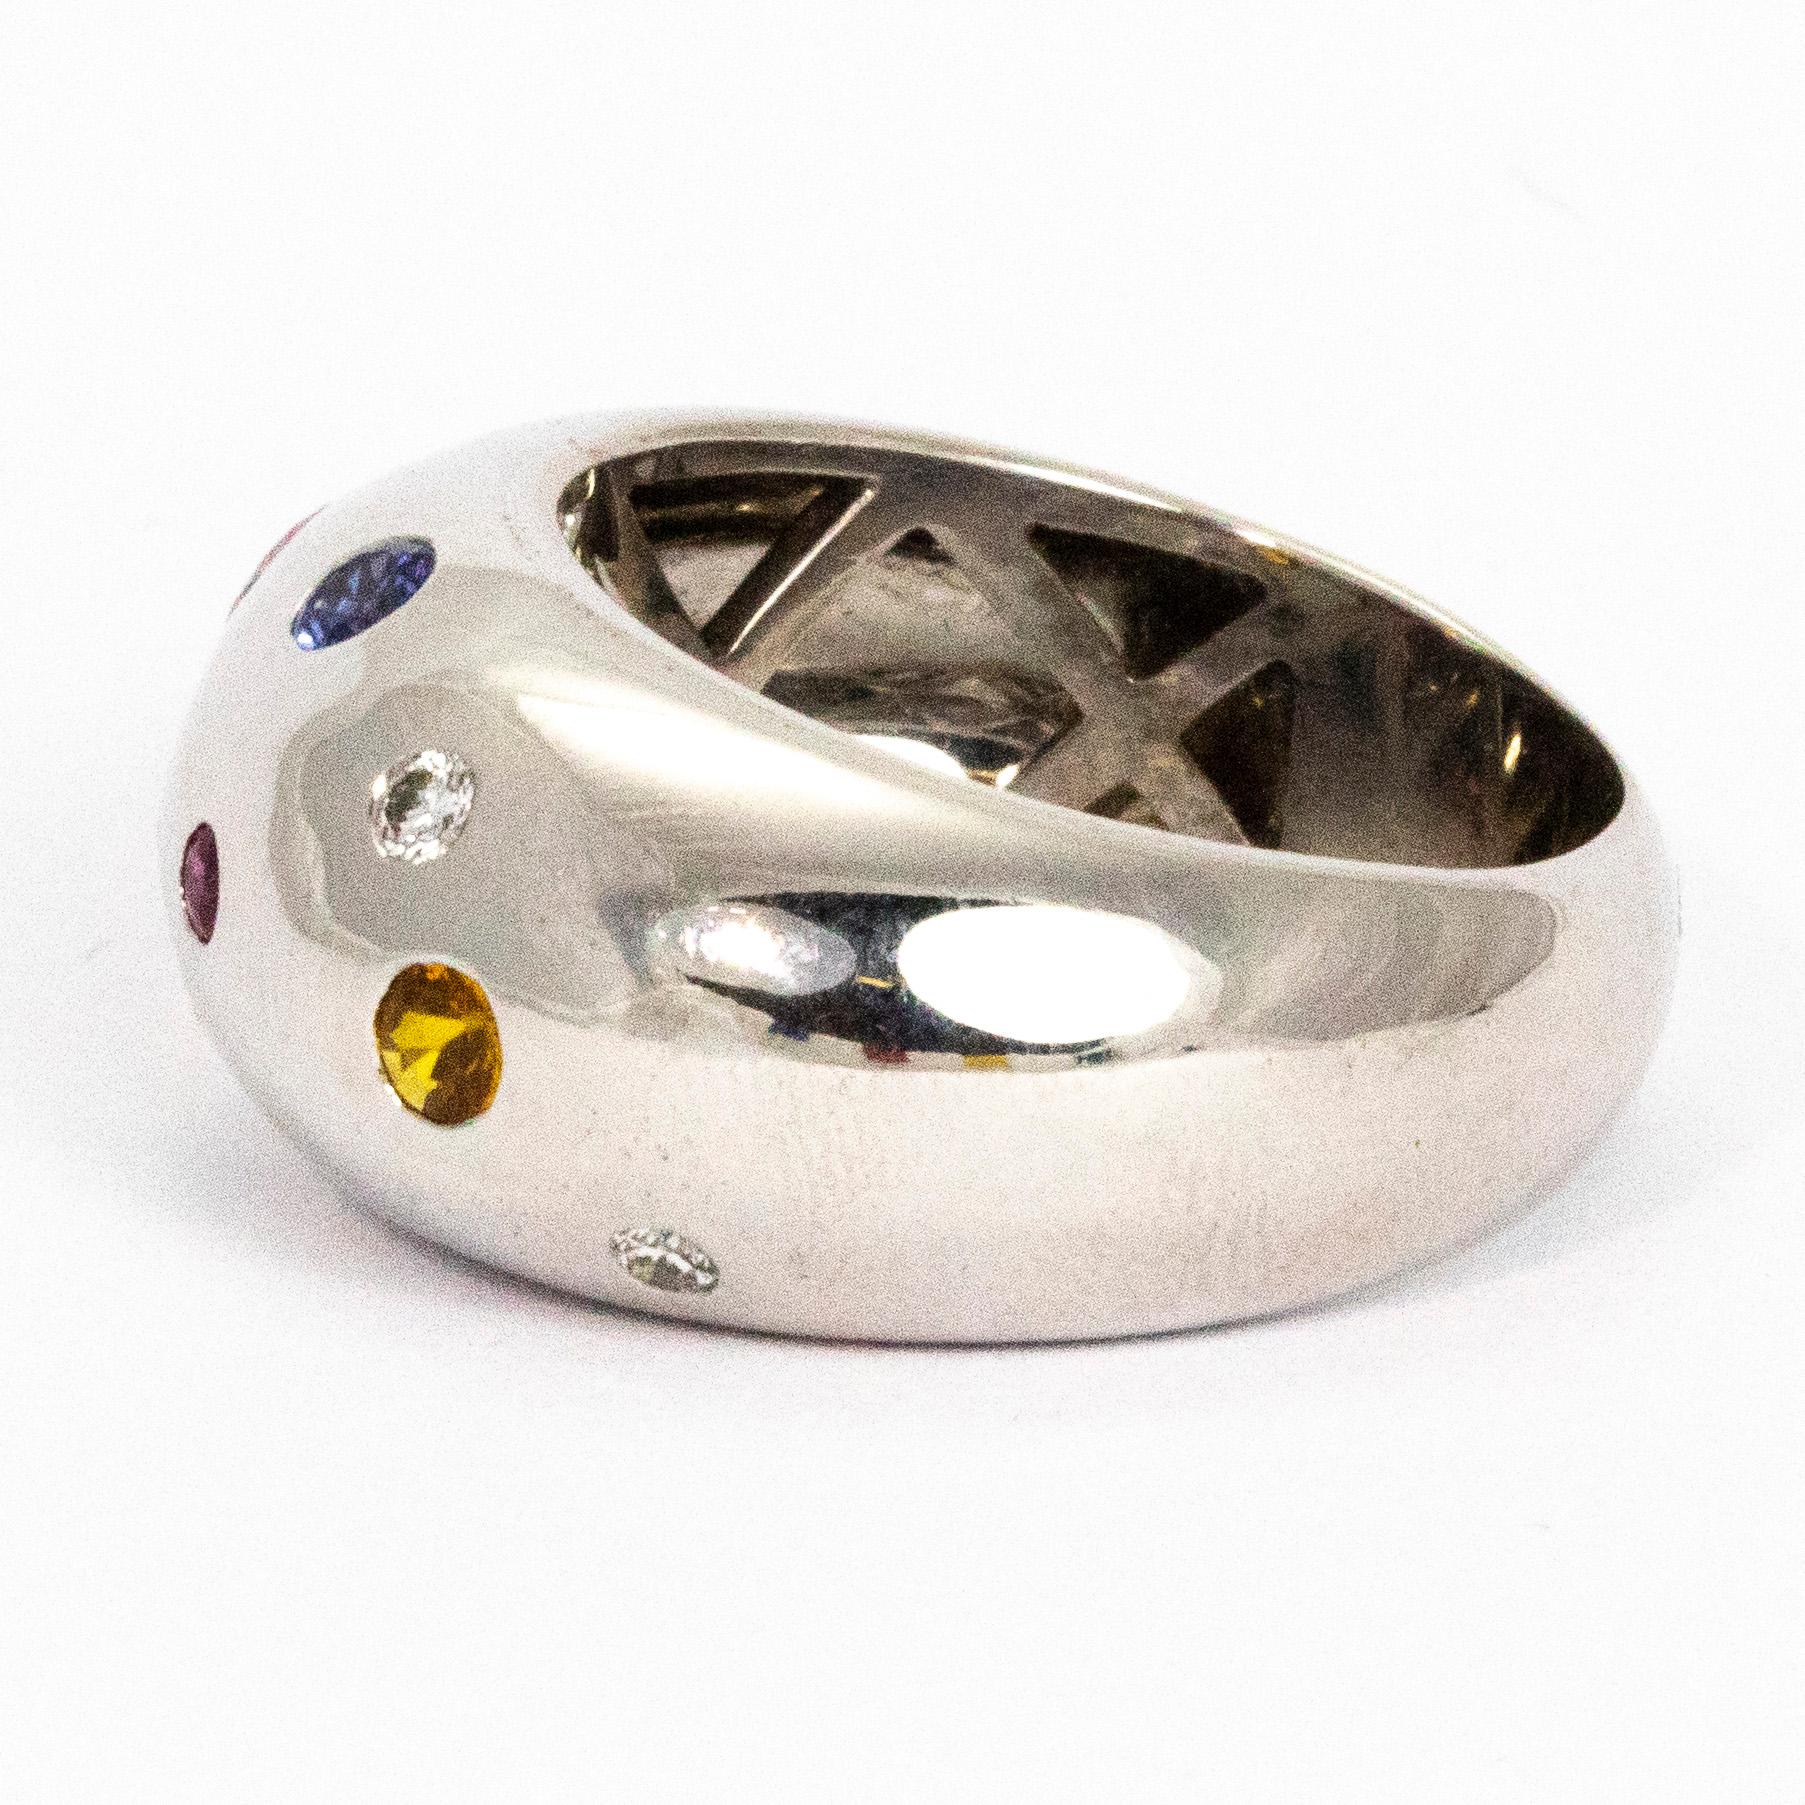 This ring holds Sapphires, Diamond, Rubies and Citrine. The multi coloured stones in this chunky 18ct white gold band are stunning. The smooth rounded band is paired perfectly with the round cut stones of all sizes. Hallmarked London 2015. 

Ring